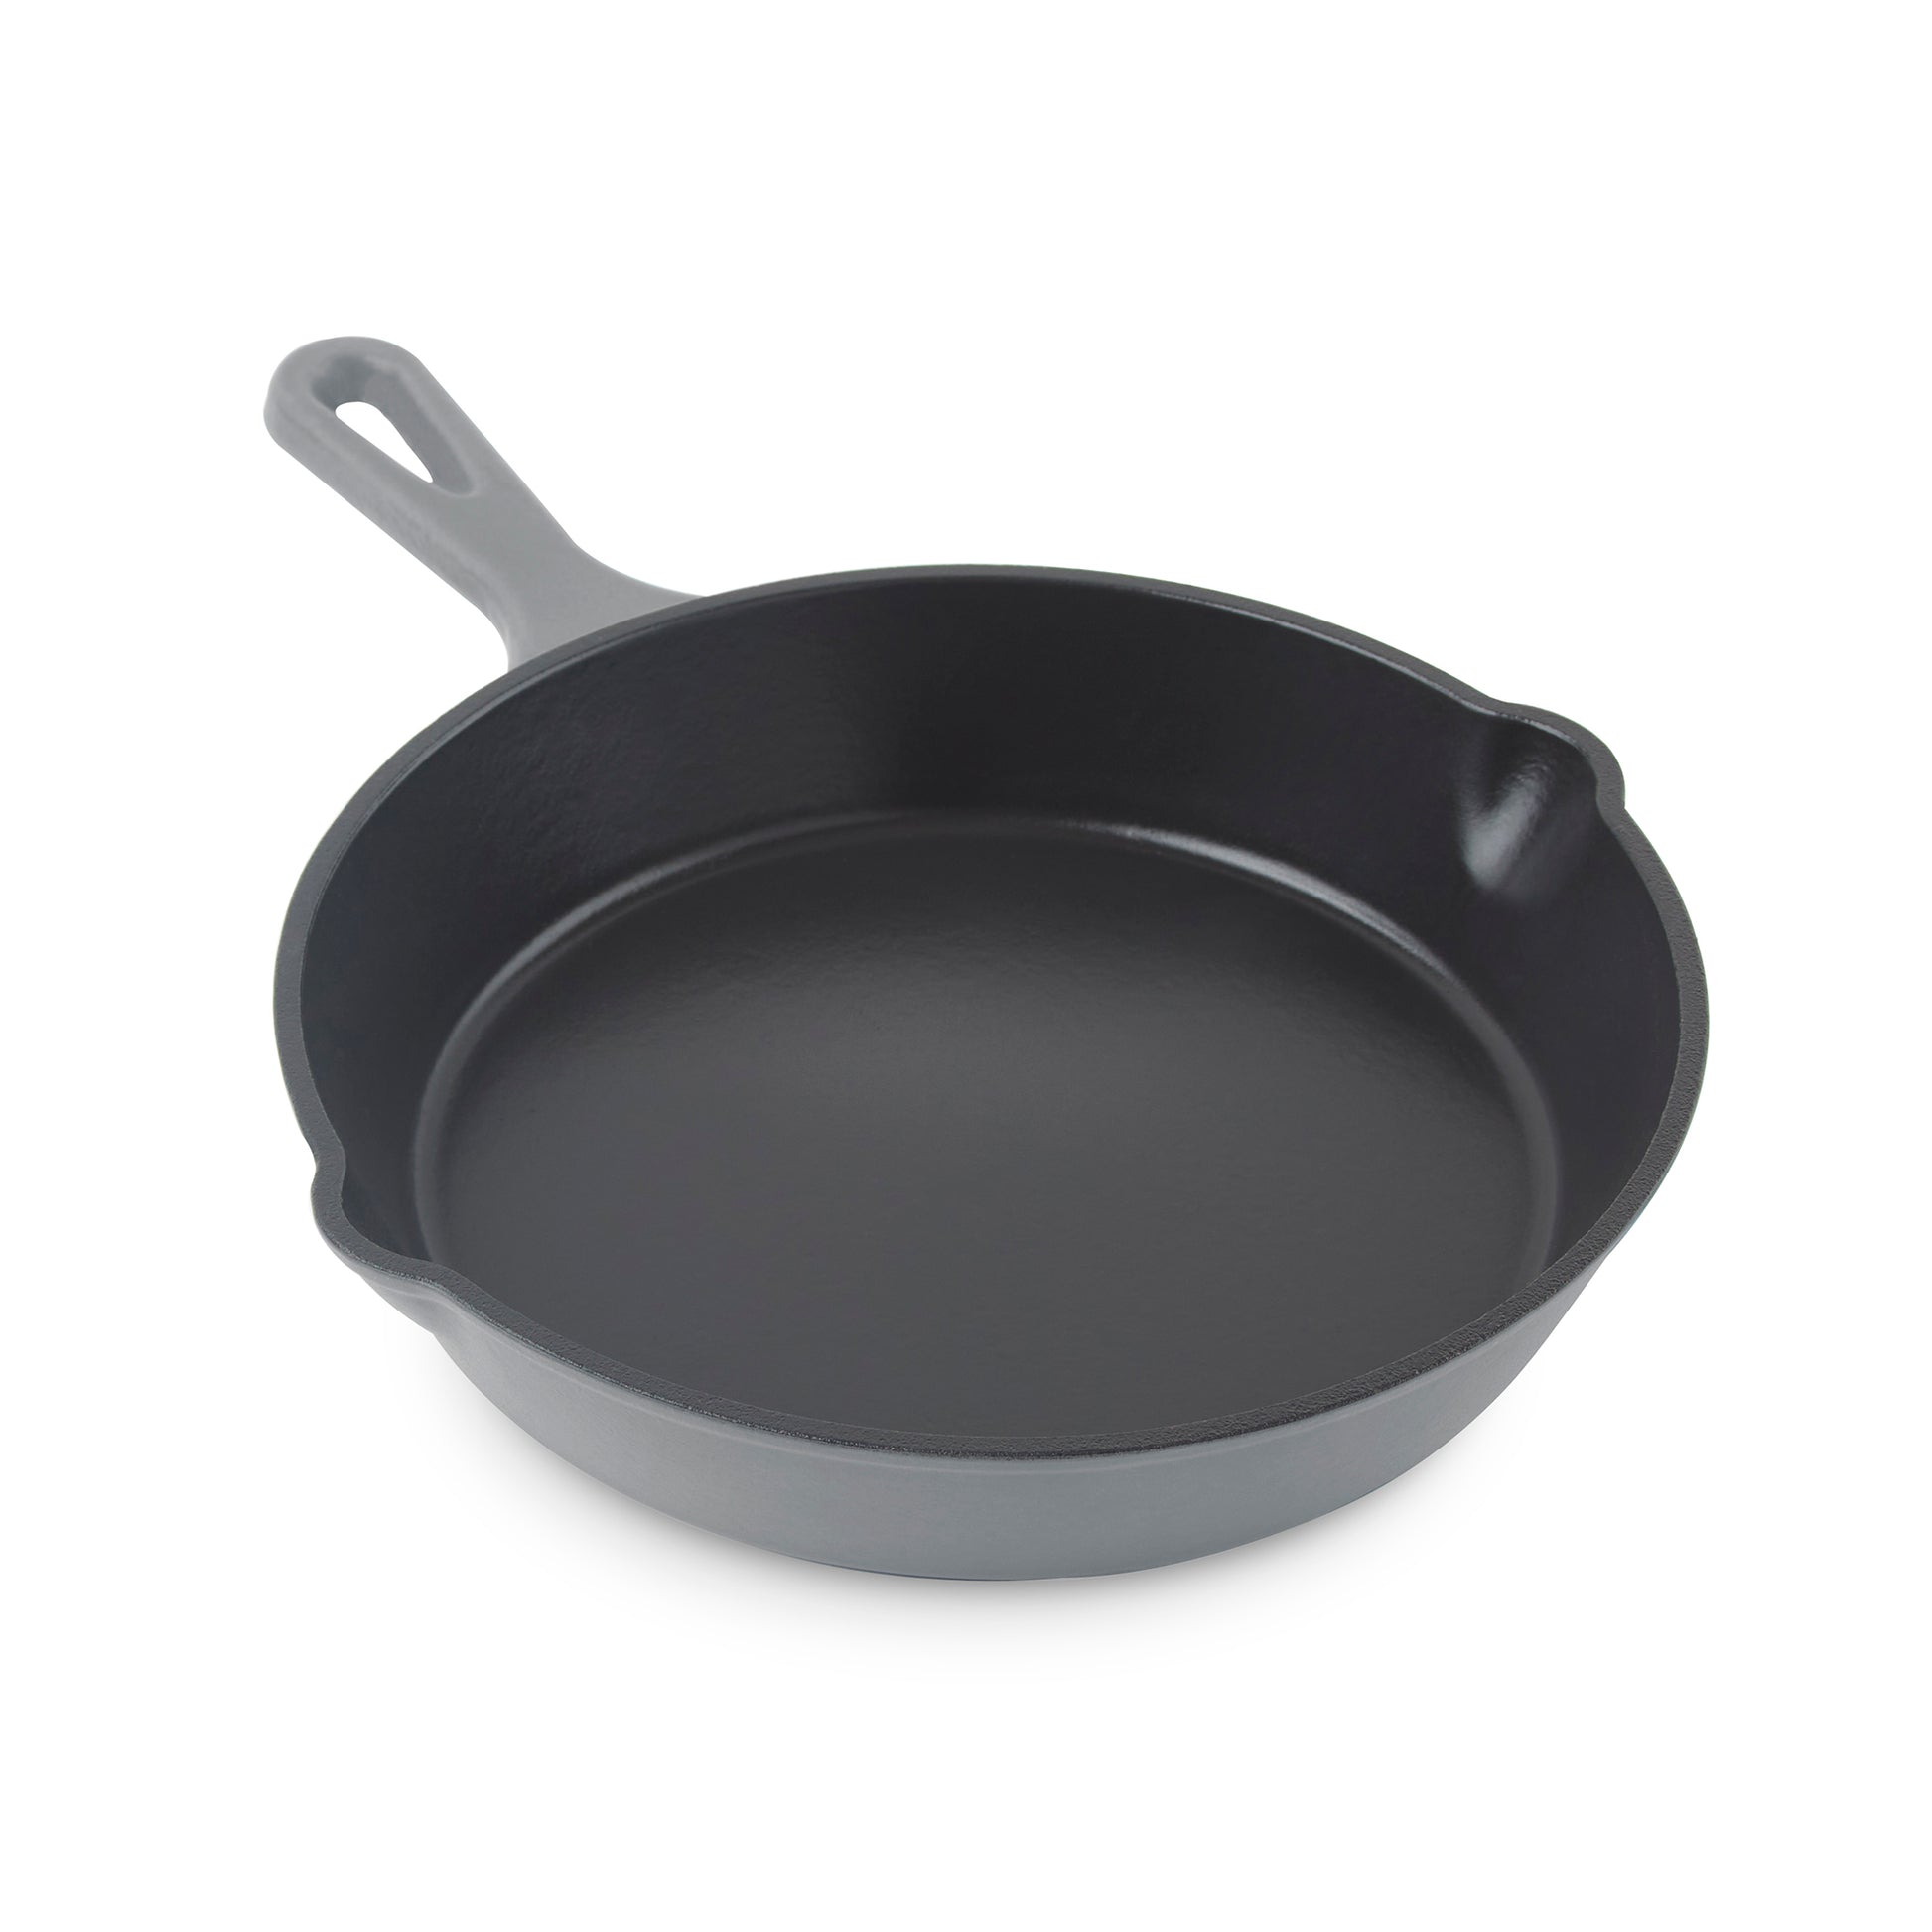 Geoffrey Zakarian 9.5 Non-Stick Cast Iron Frying Pan, Titanium-Infused Ceramic Coating with Two Easy Pour Spouts - Gray